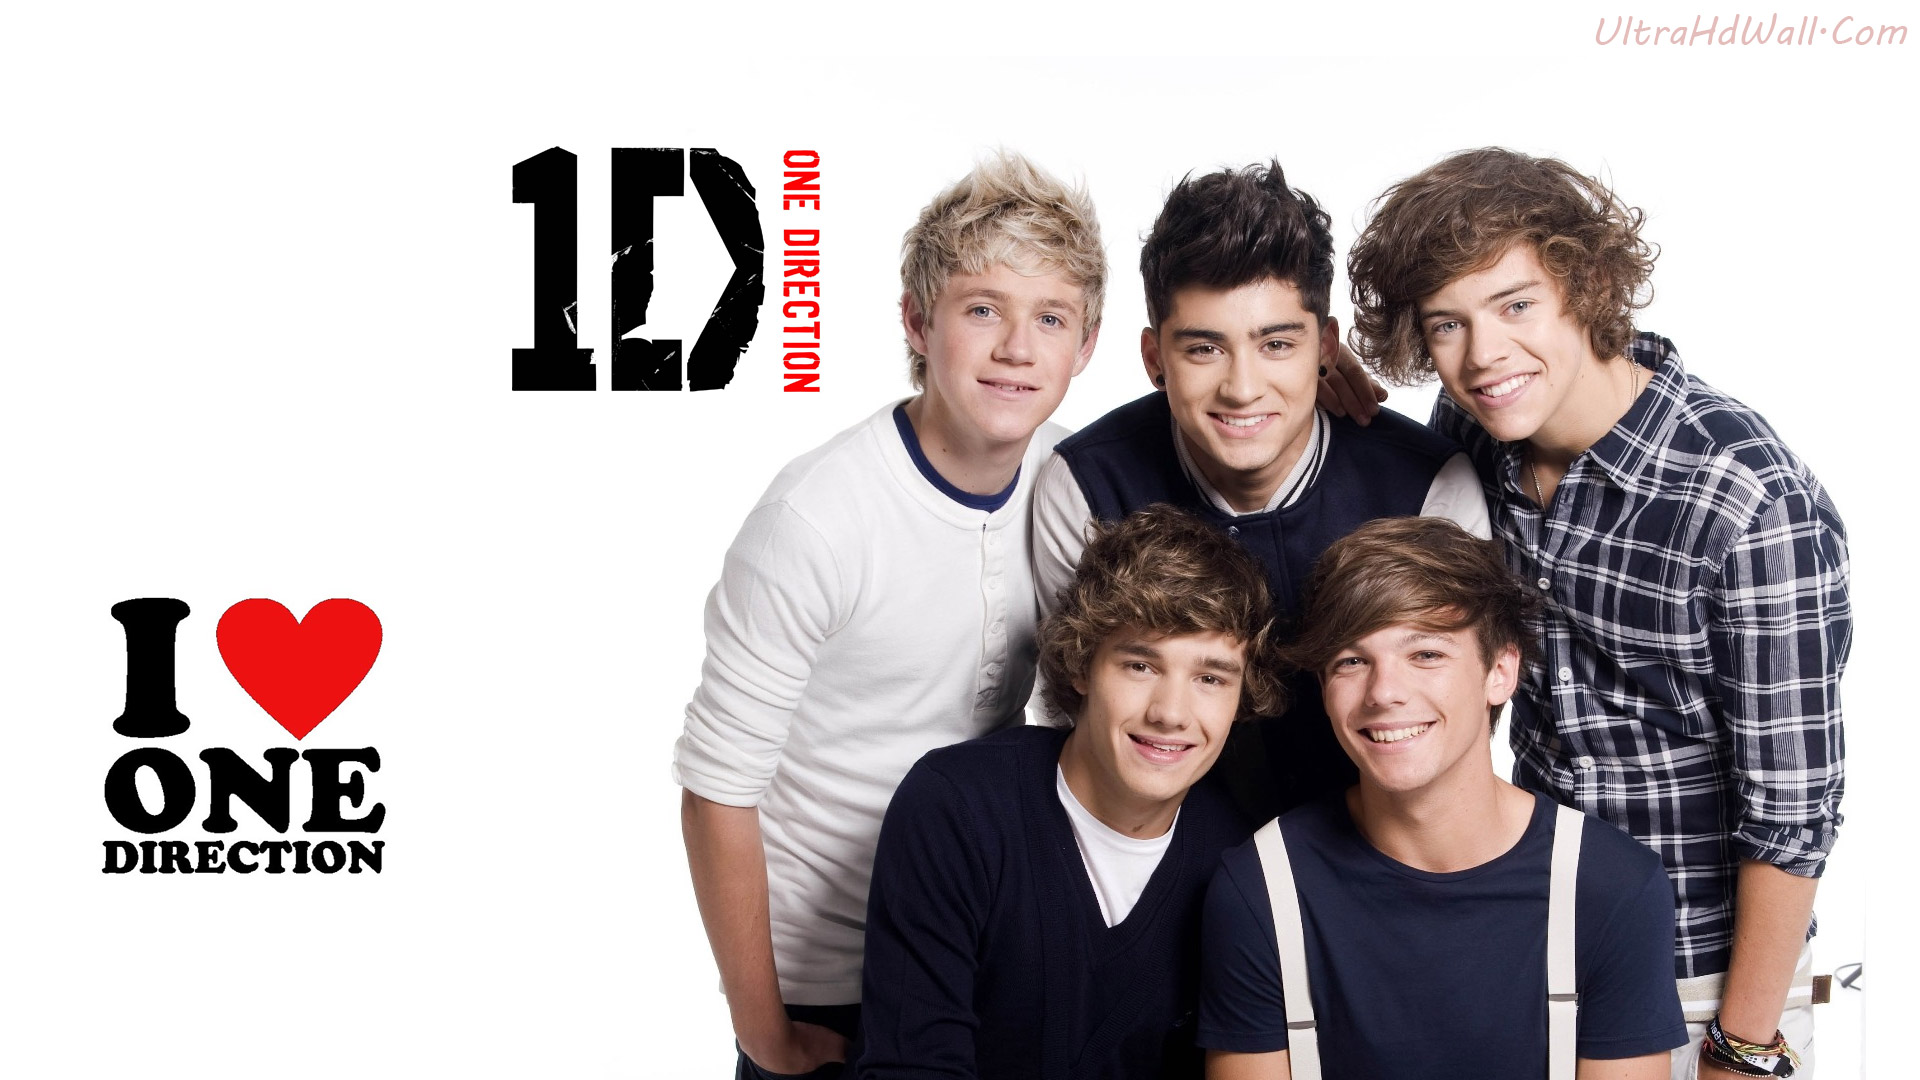 Image One Direction Desktop Wallpaper Full Pc Android